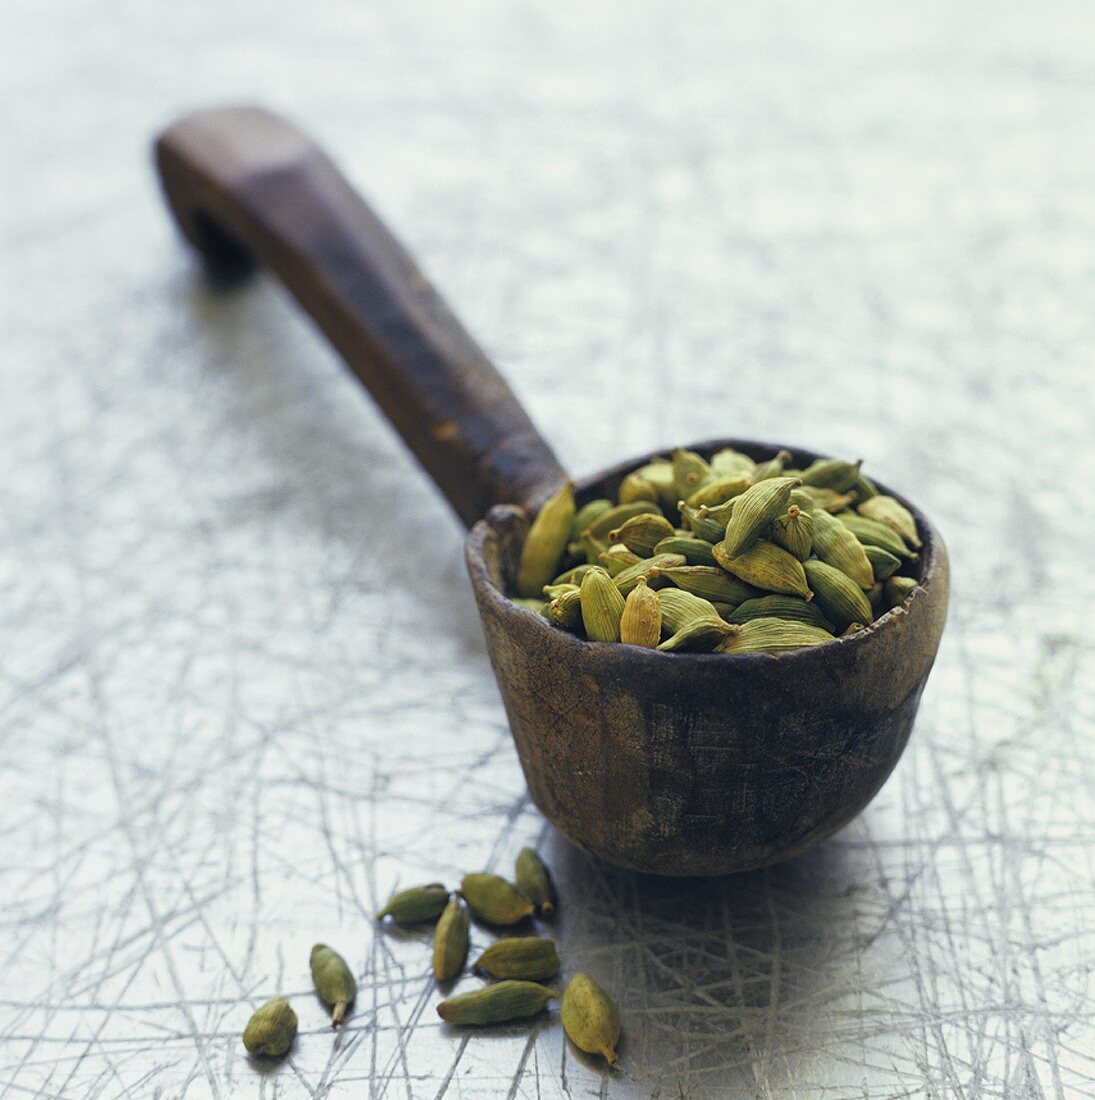 Cardamom pods in wooden spoon